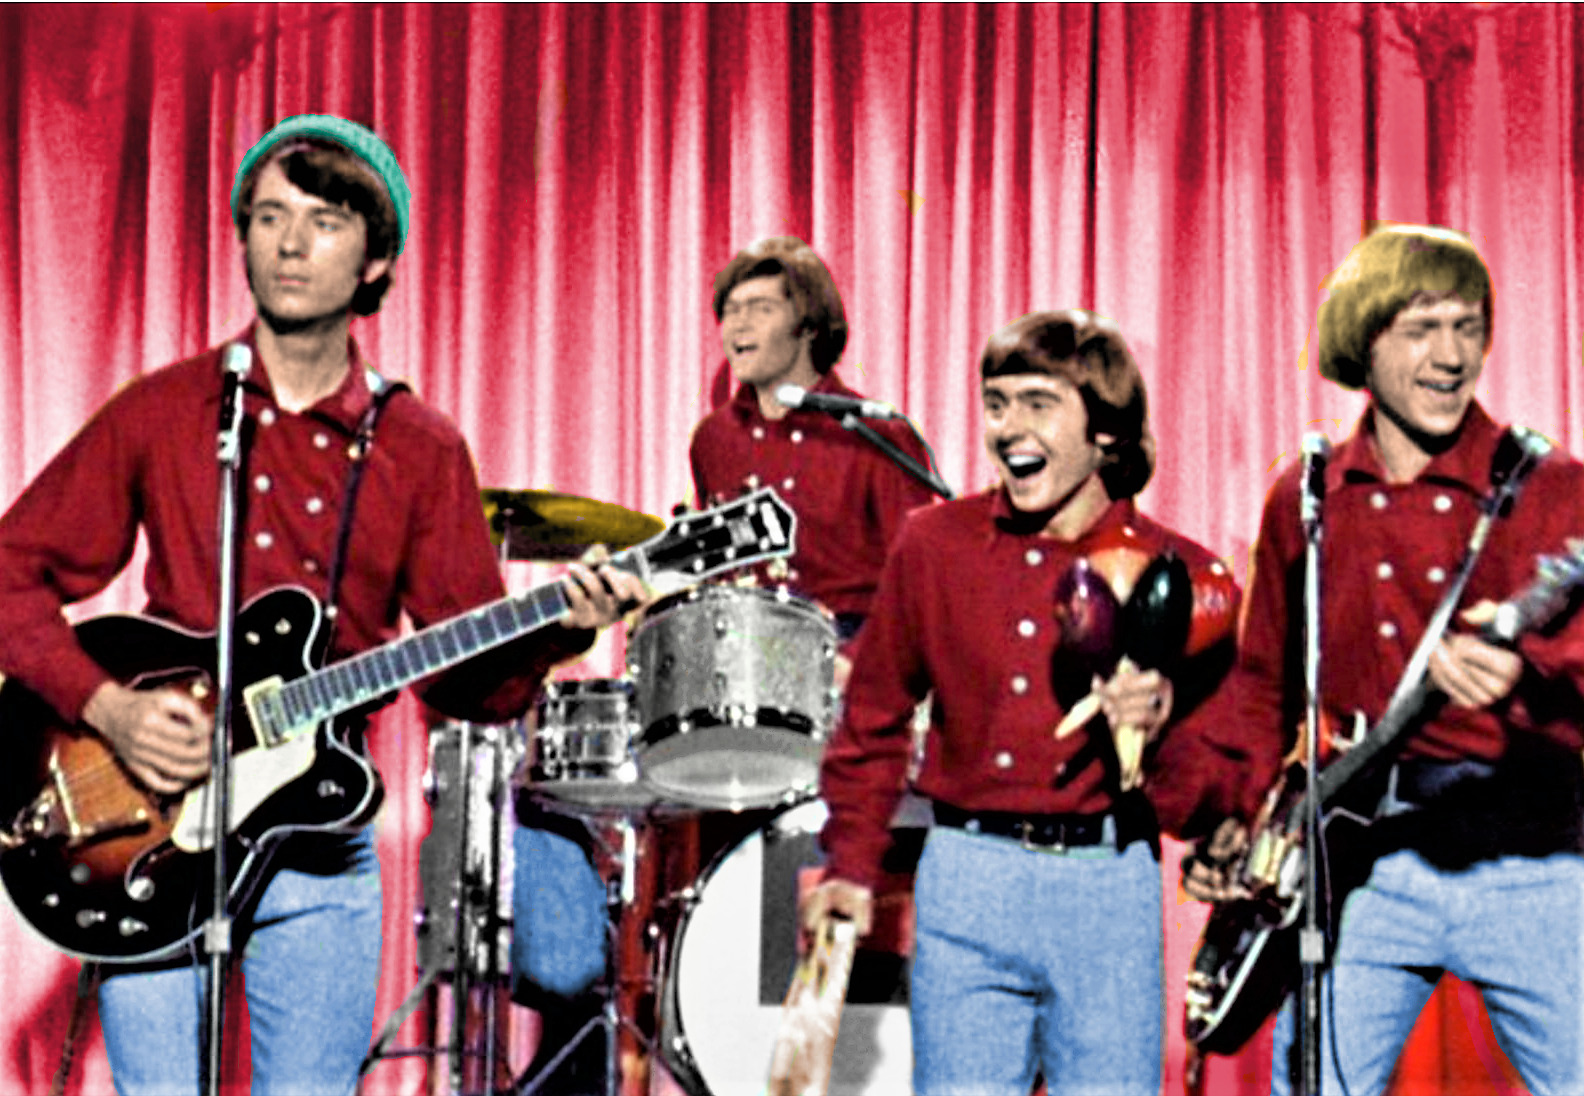 THE MONKEES -  REFRIGERATOR PHOTO MAGNET